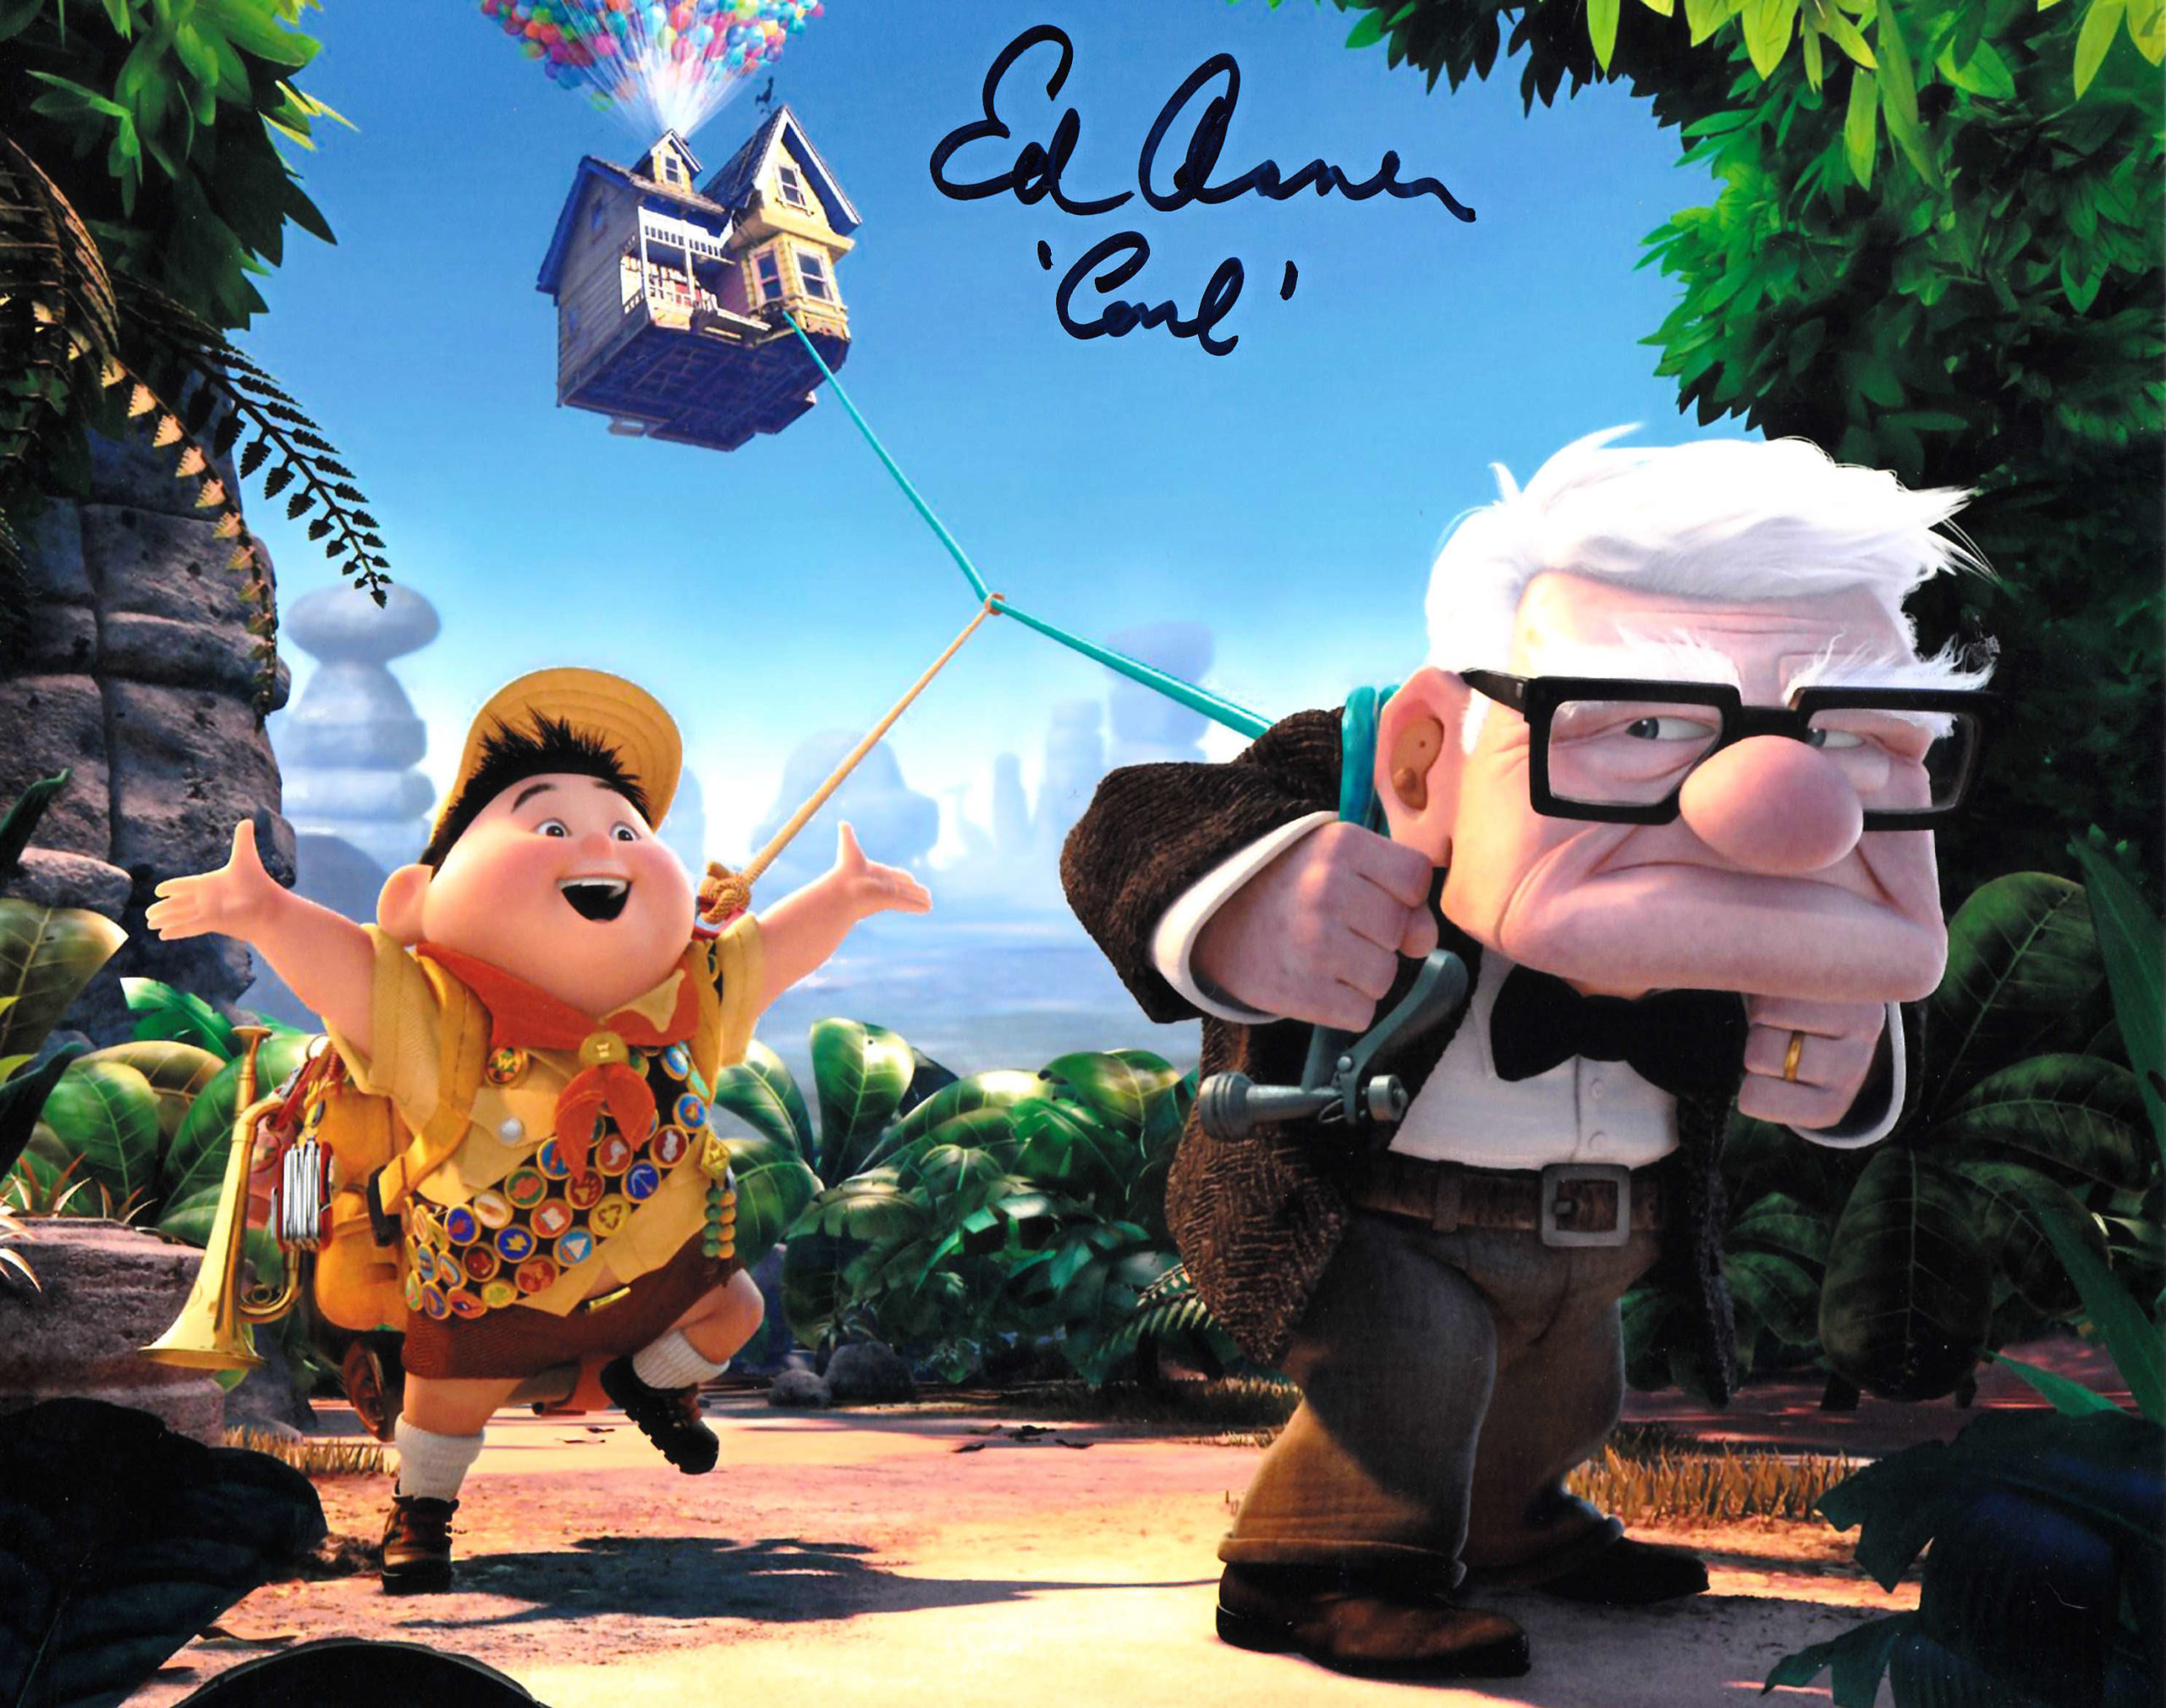 Ed Asner signed 8x10 photo from Disney's UP - Fanboy Expo Store.